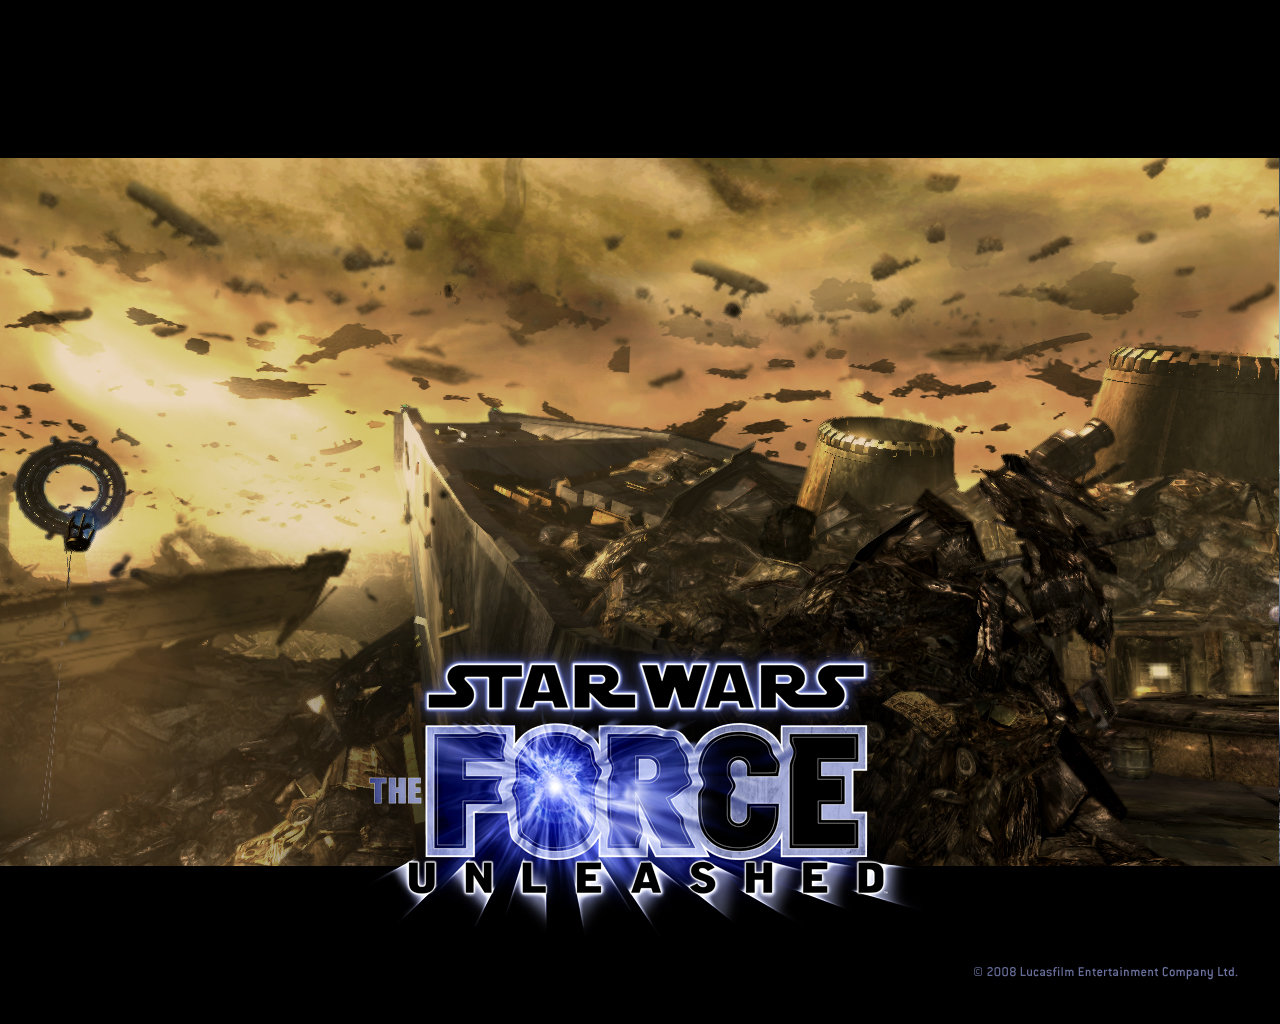 Awesome Star Wars - Star Wars The Force Unleashed - HD Wallpaper 